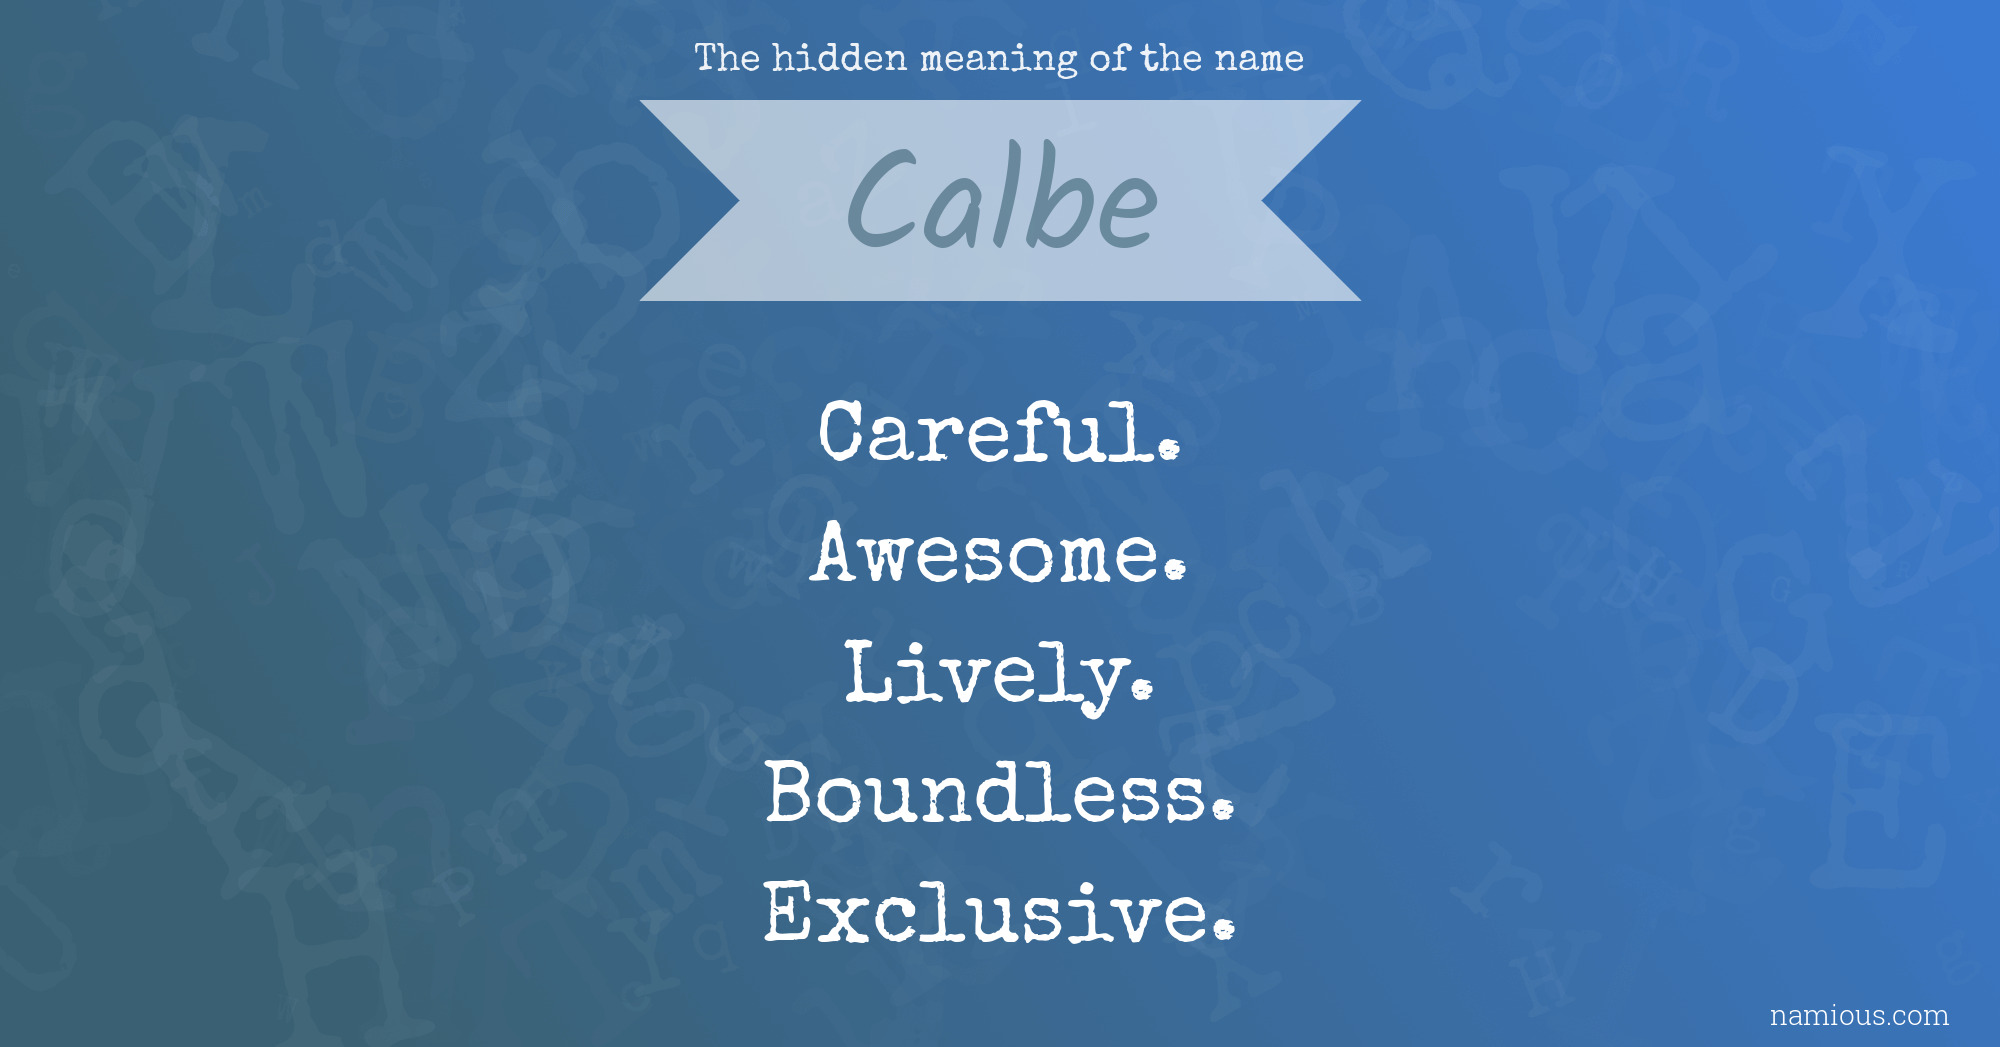 The hidden meaning of the name Calbe